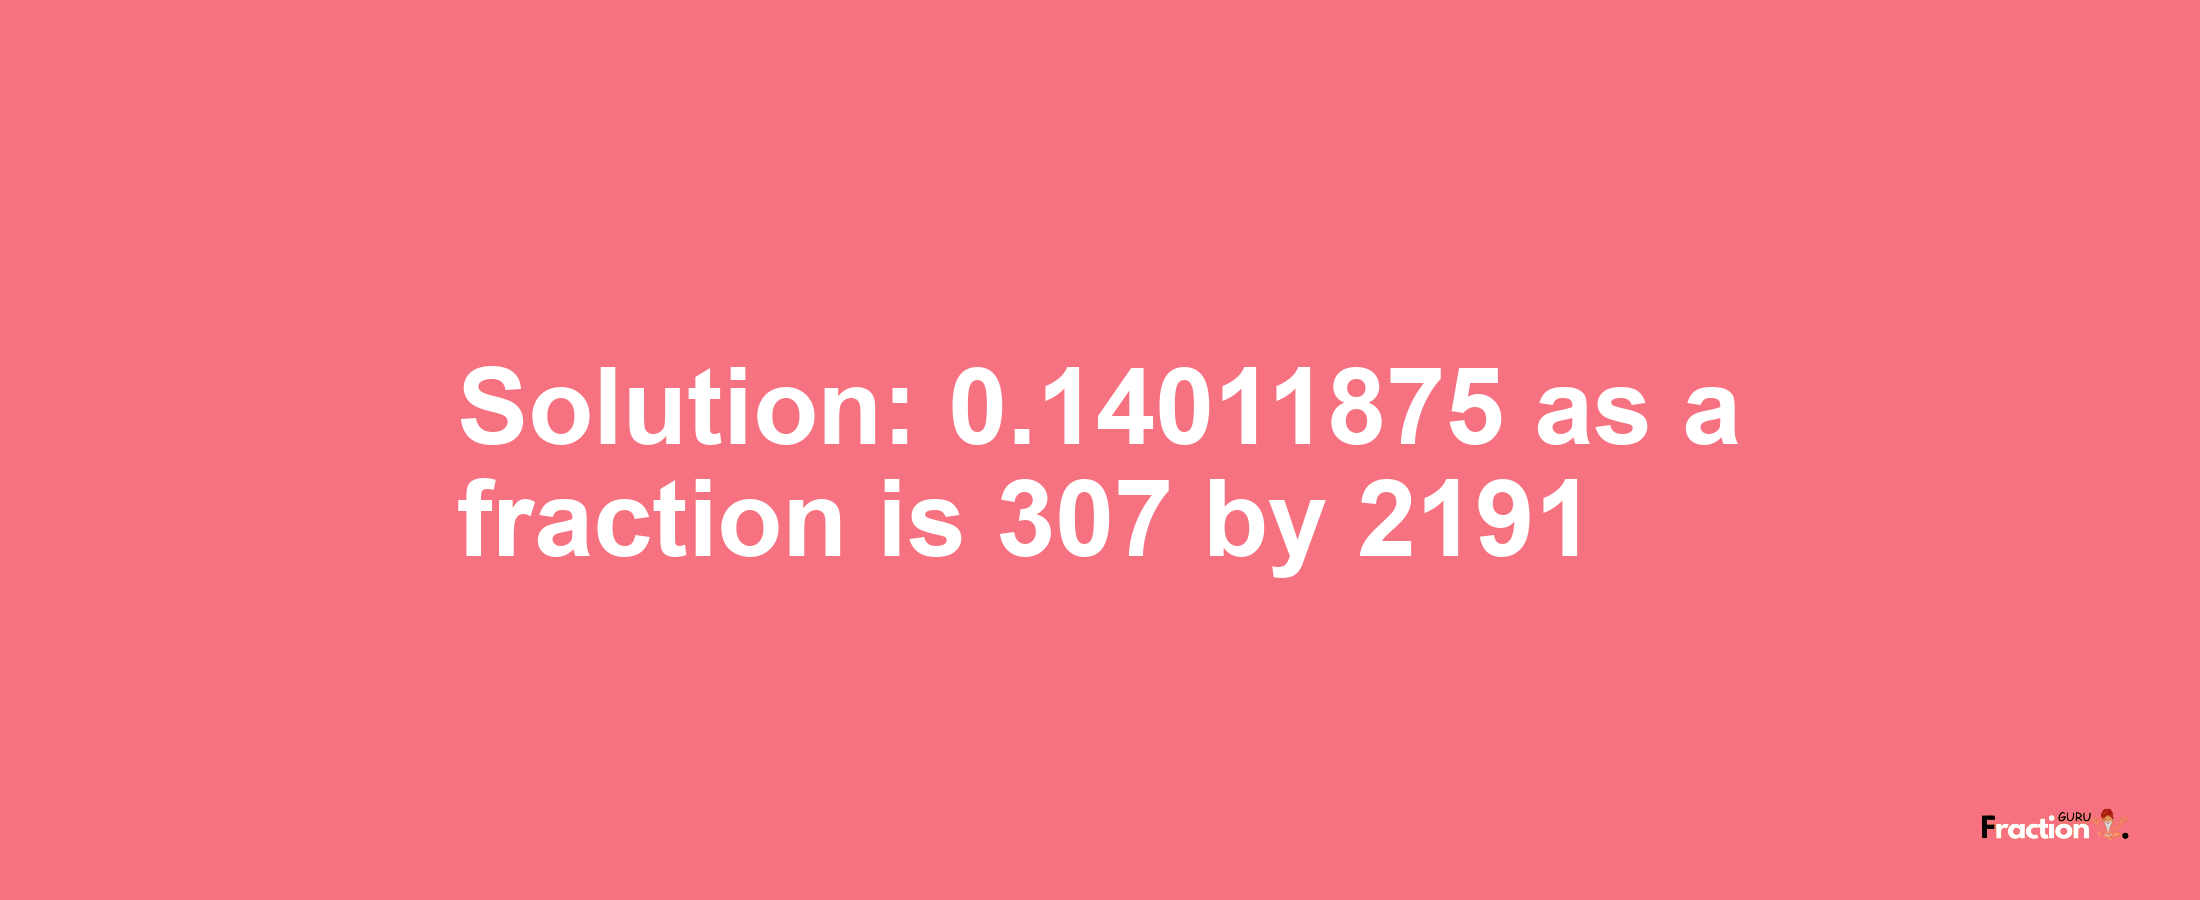 Solution:0.14011875 as a fraction is 307/2191